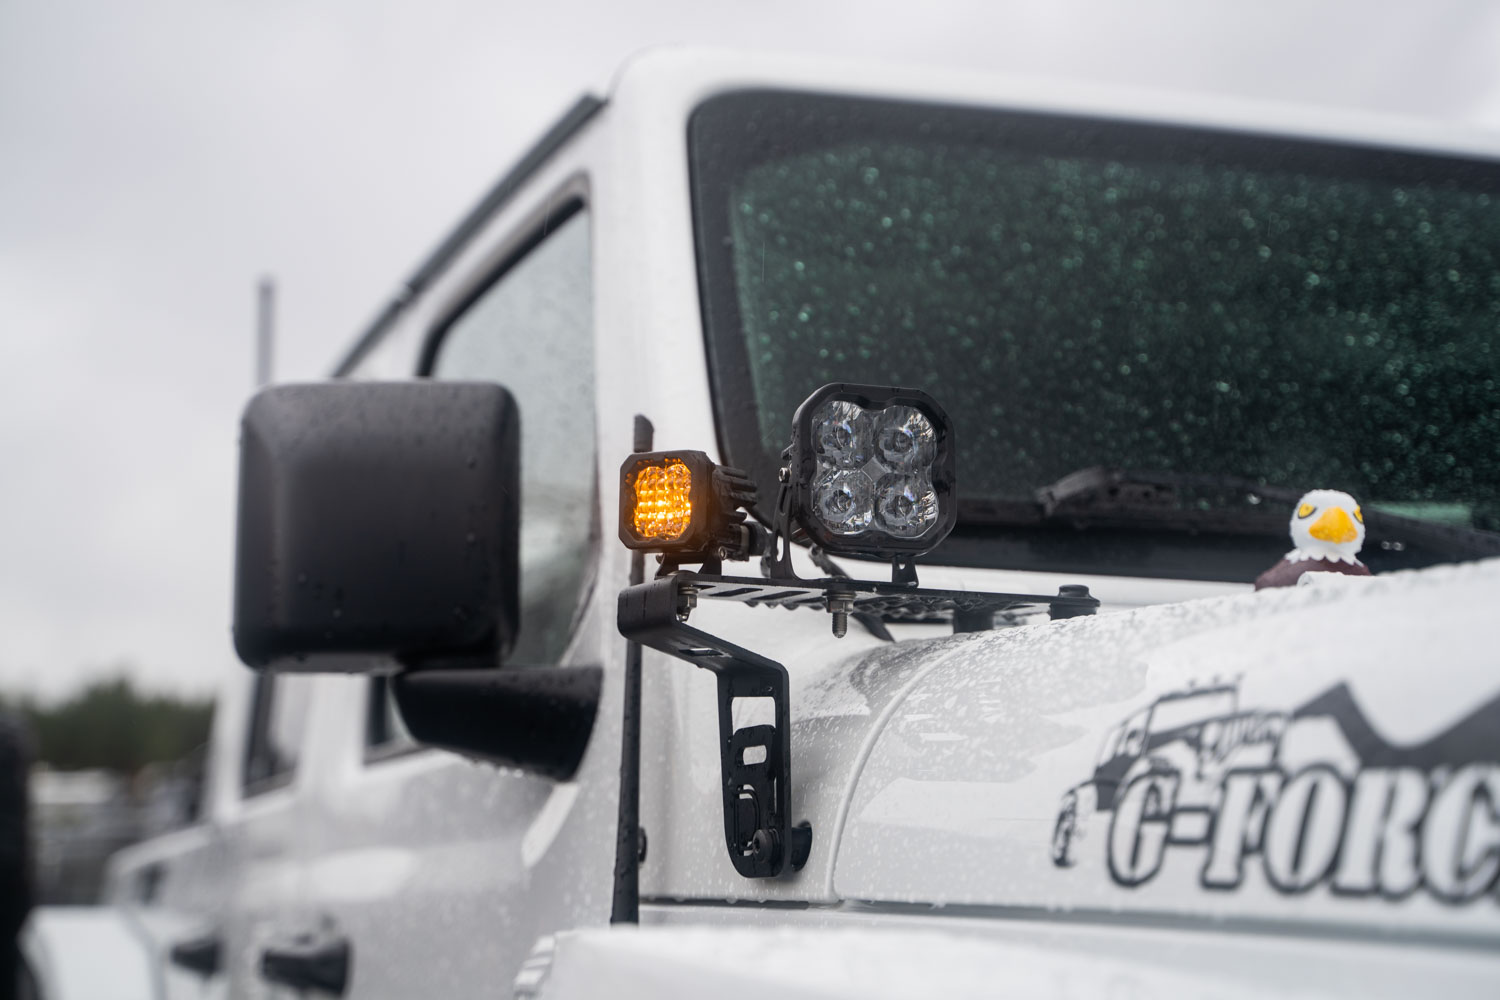 SSC1 LED Off Road ditch lights on Jeep Wrangler